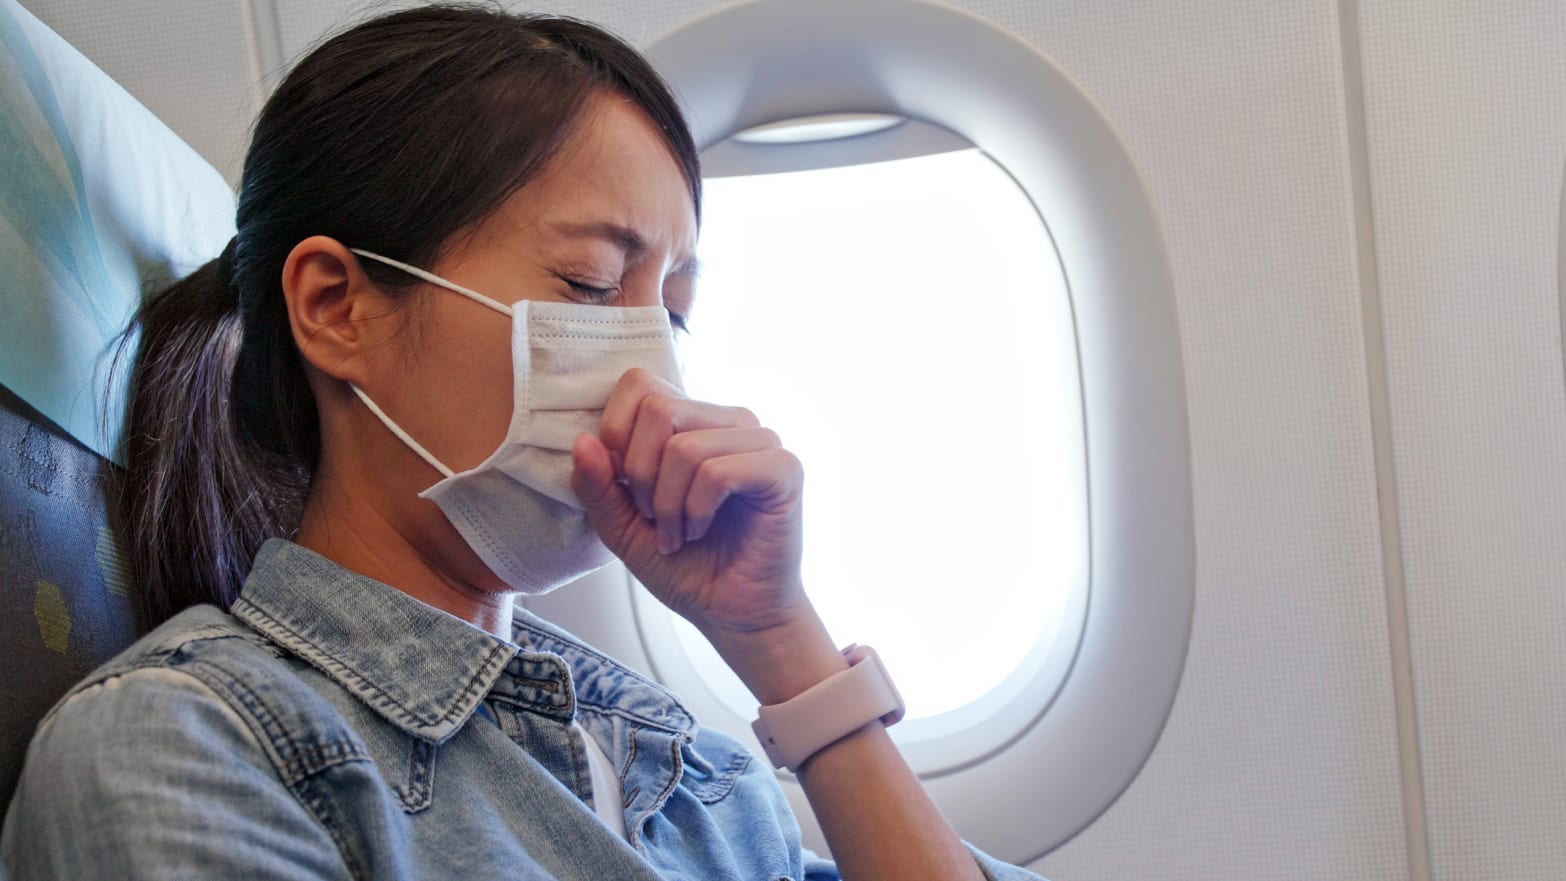 photo of woman sneezing with mask on face airplane thanksgiving will i get sick flu influenza shot vaccine flight holiday travel immunity immune system robin thompson